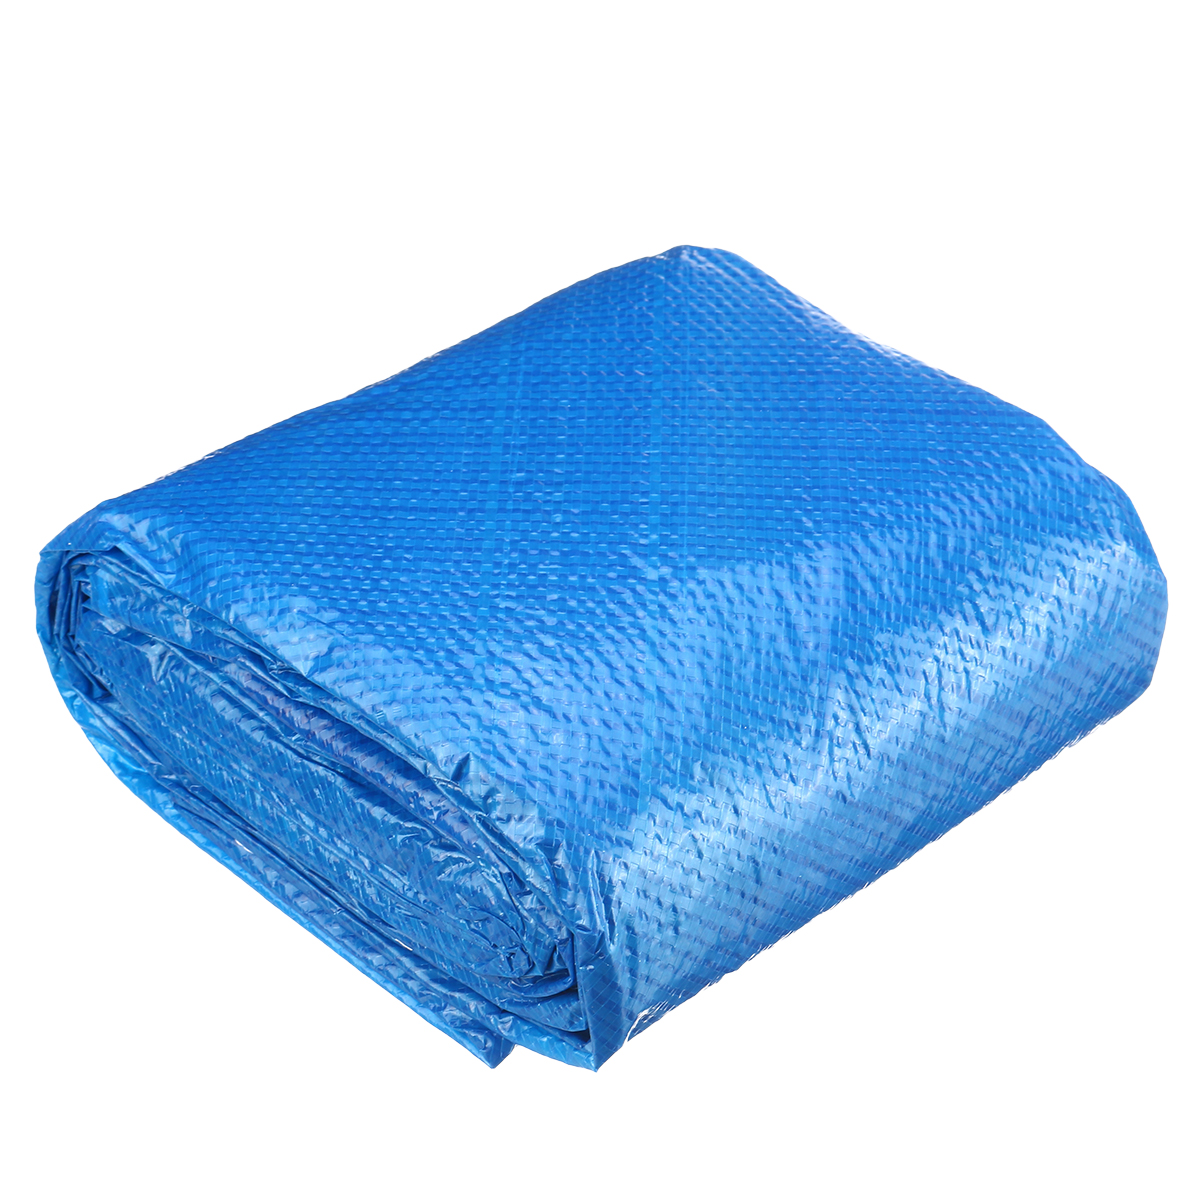 244305366cm-Round-Inflatable-Paddling-Swimming-Pool-Dust-Cover-Tarp-Rope-1712508-5